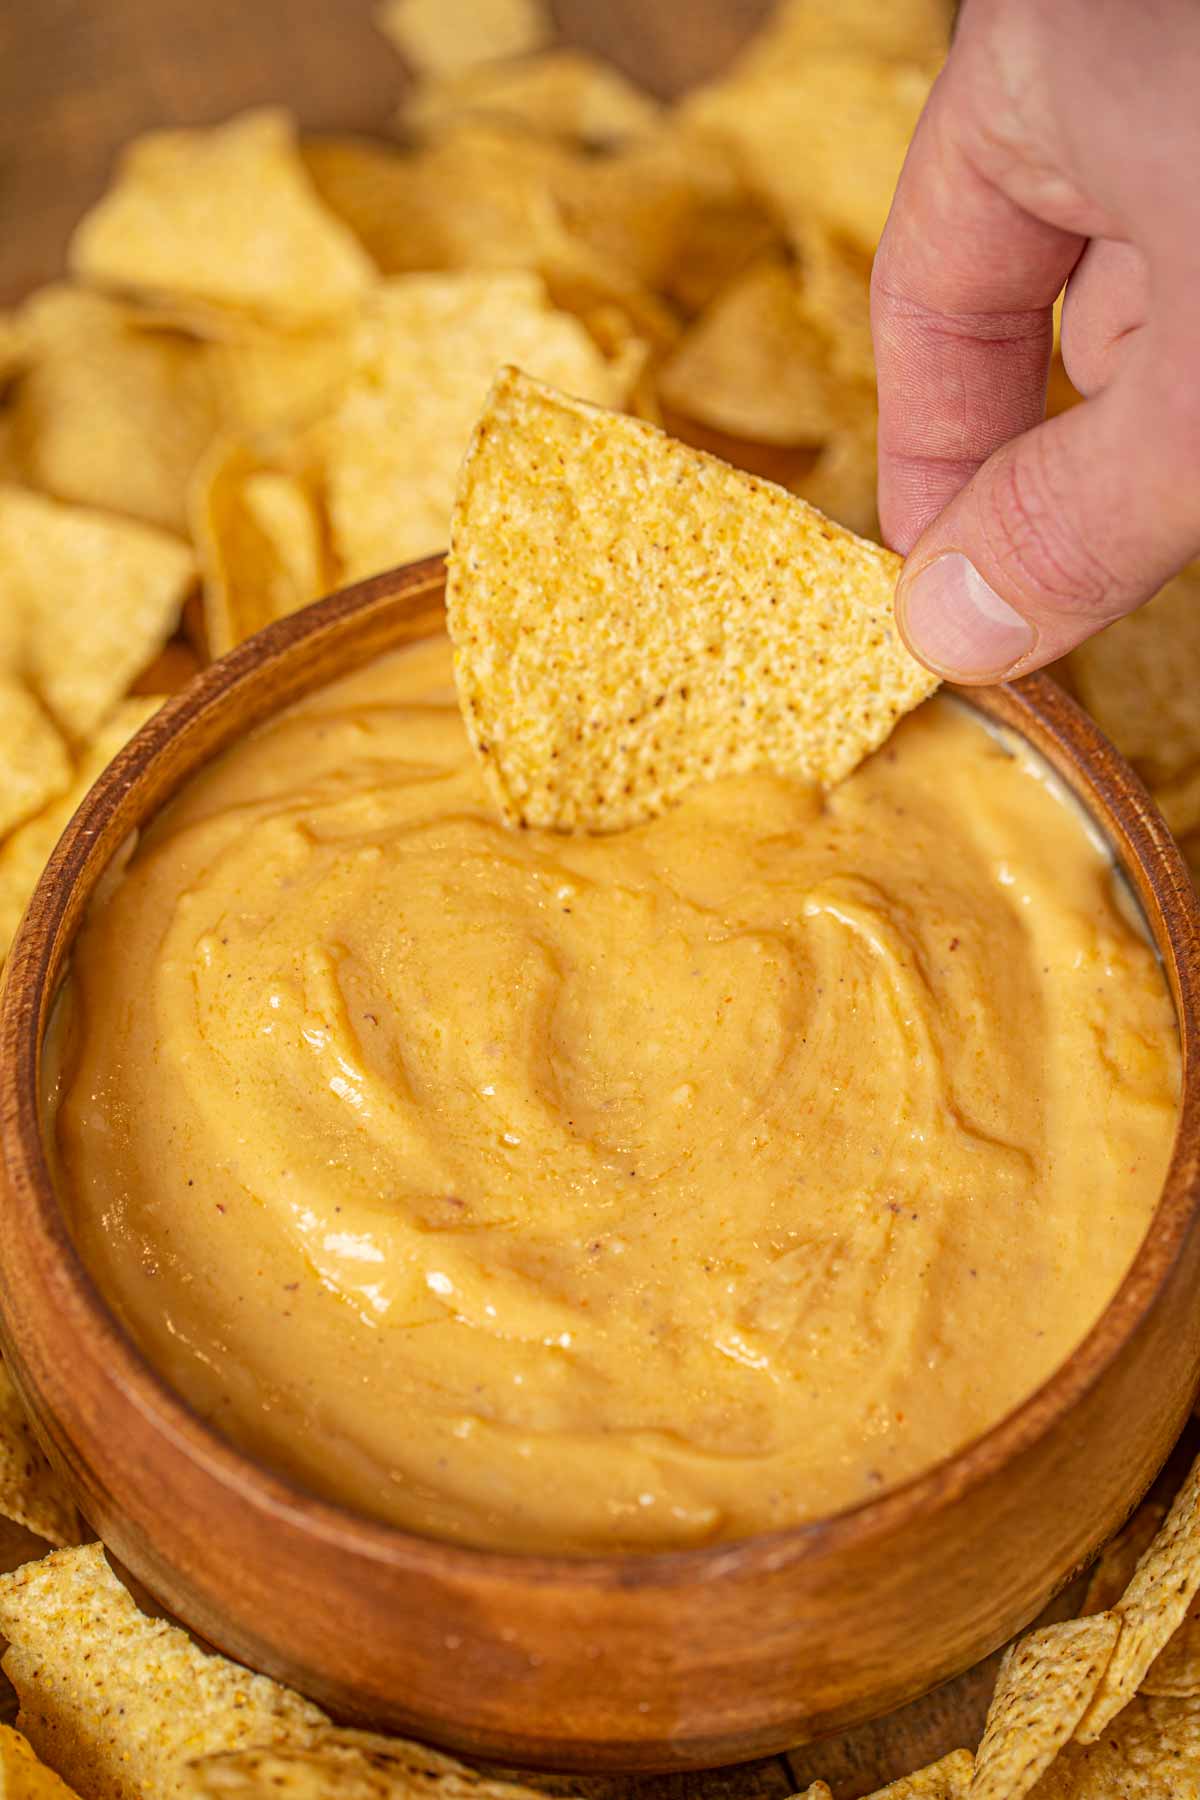 Chip dipping into beer cheese dip